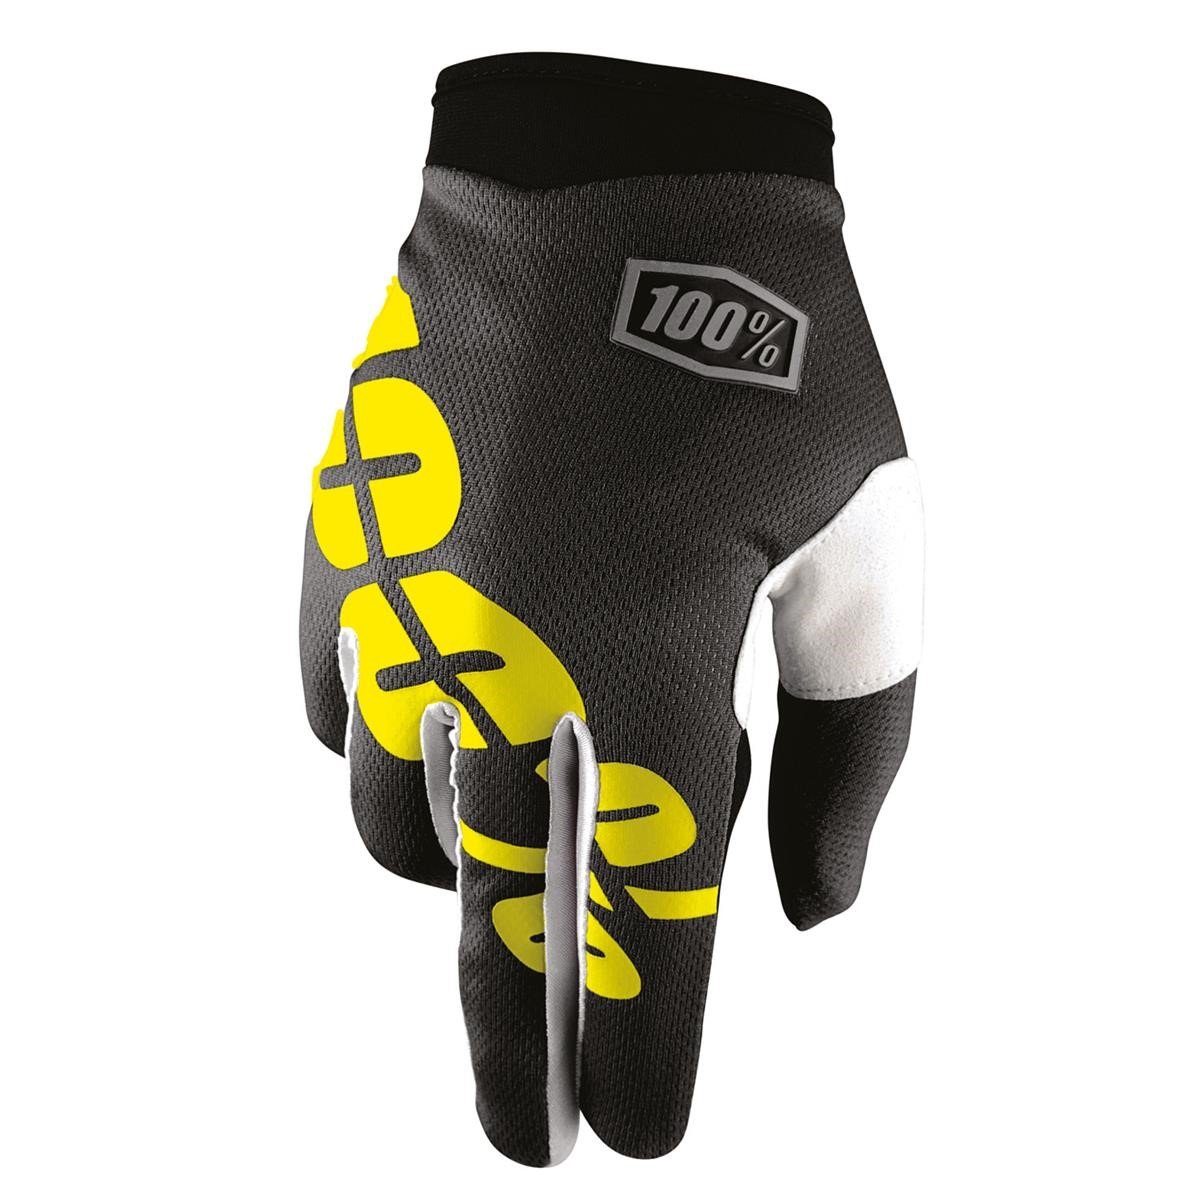 100% Gloves iTrack Black/Yellow